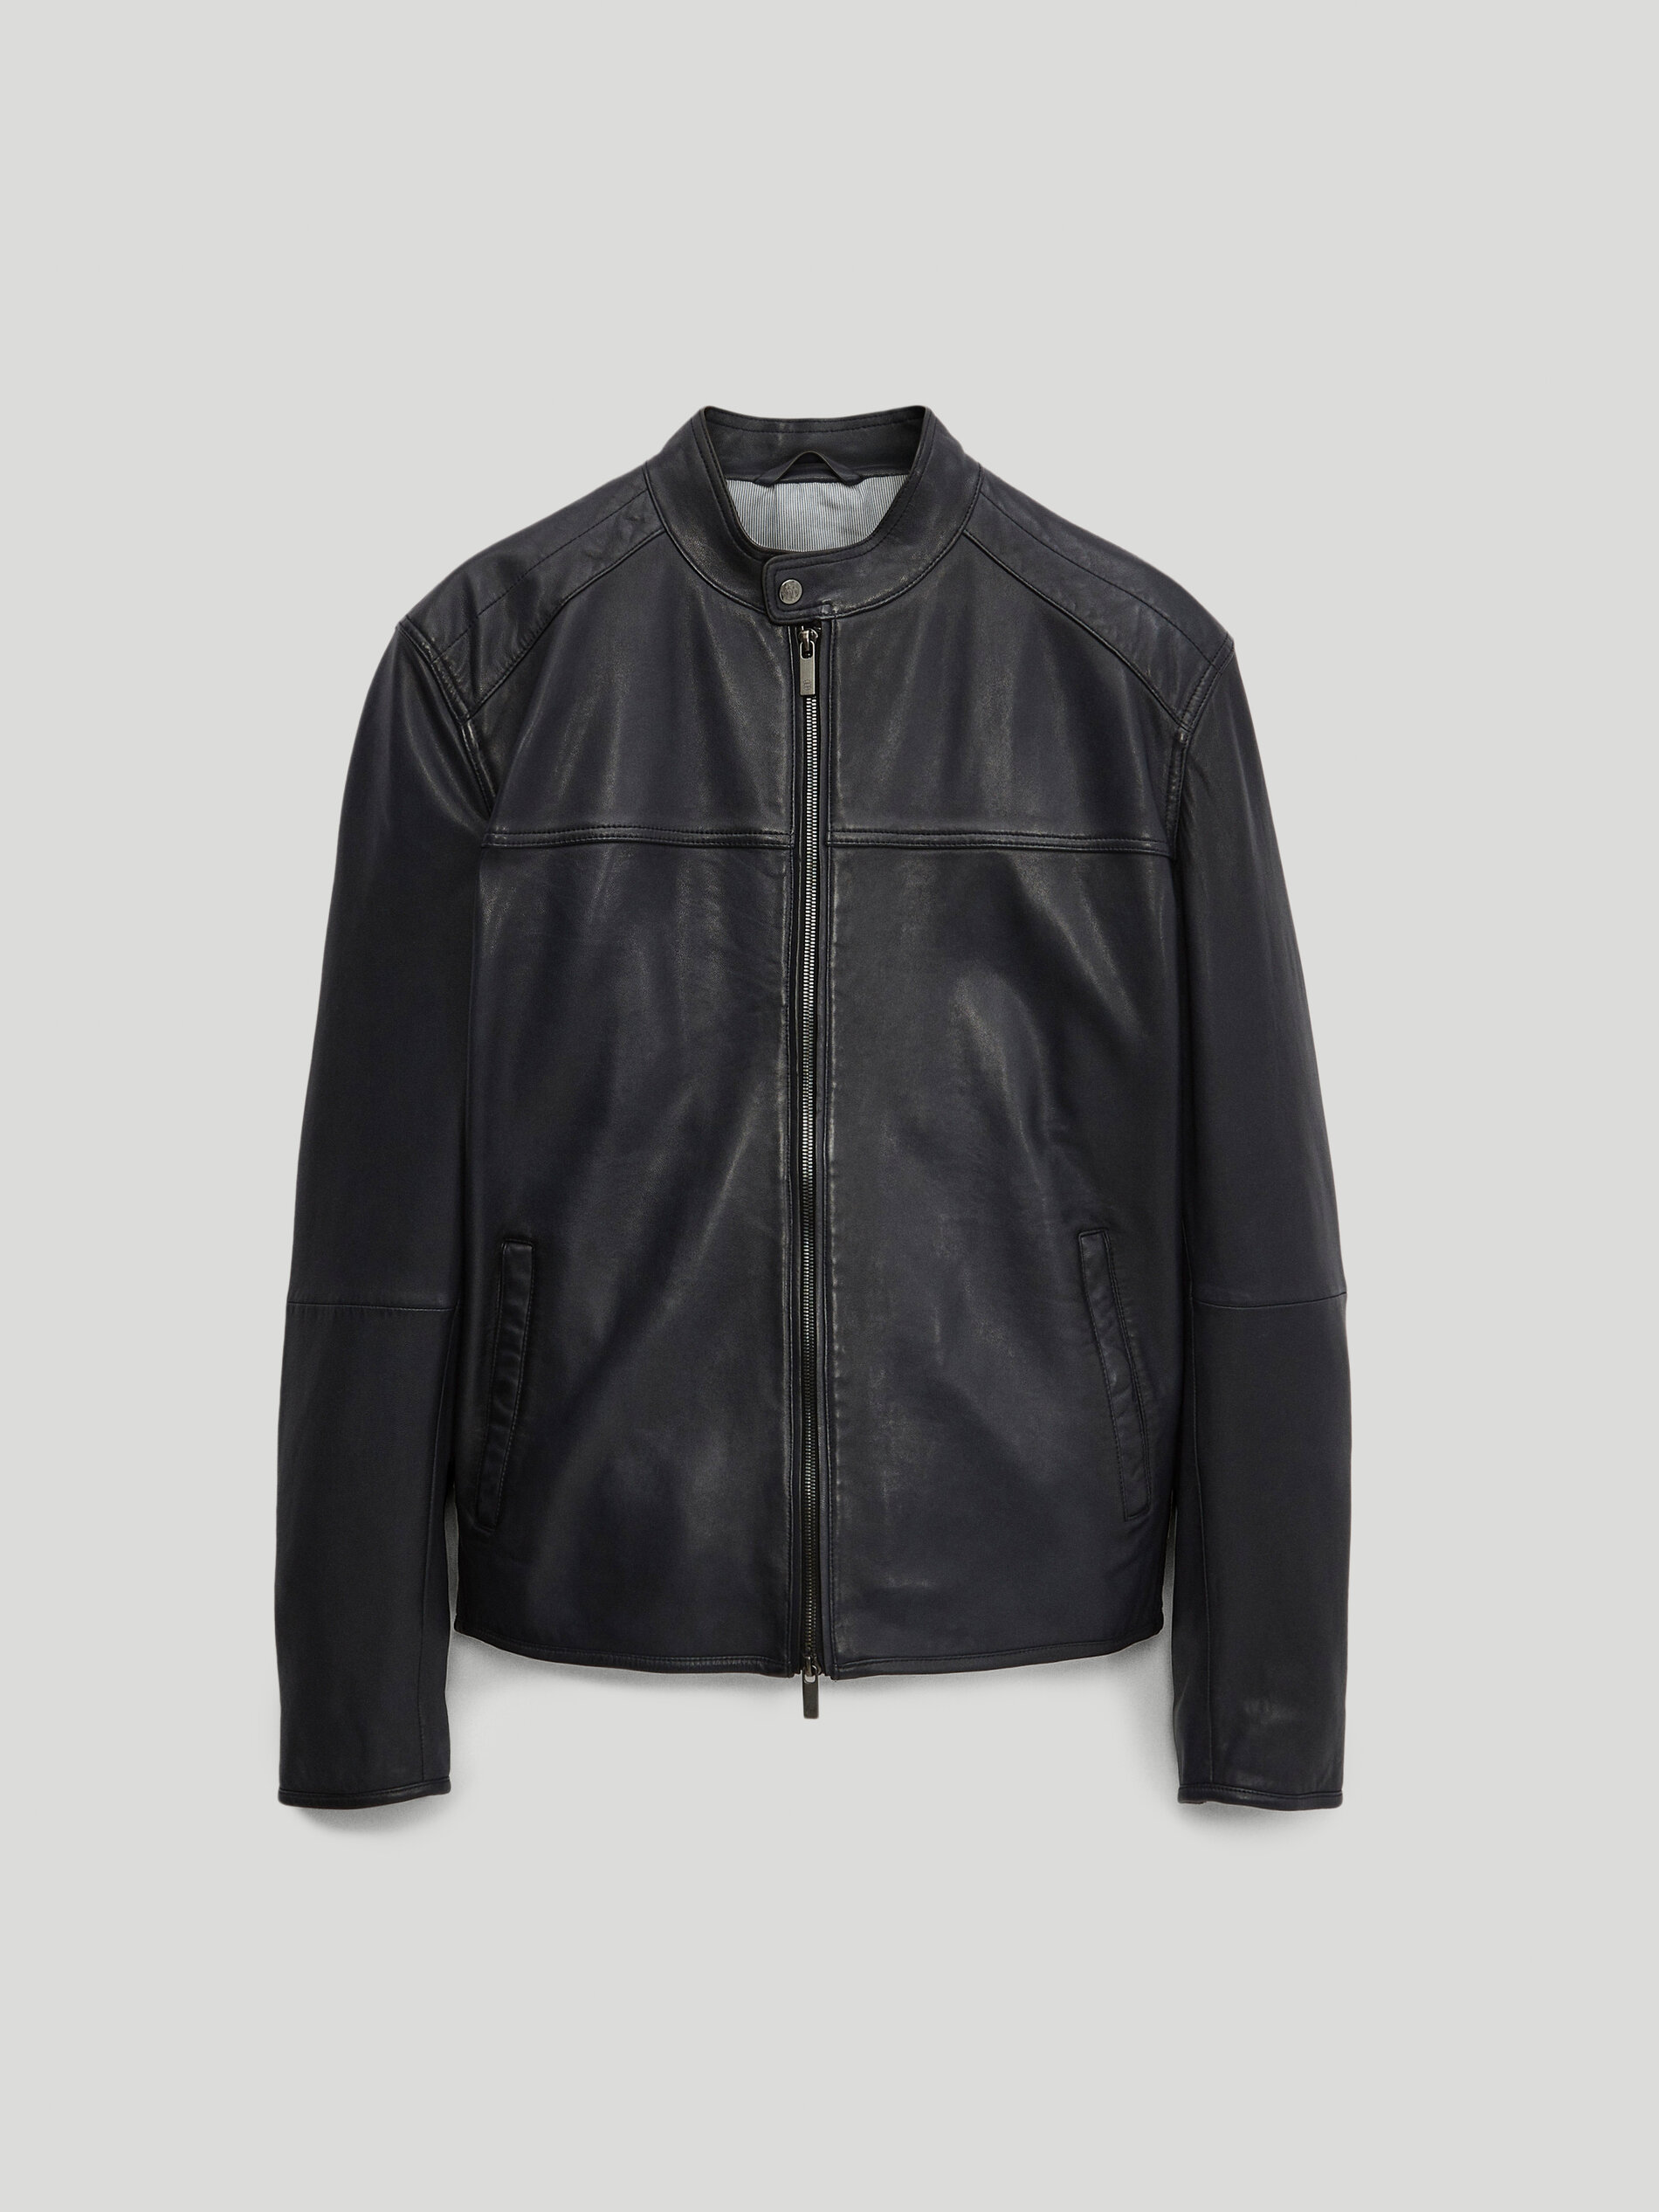 polo shirt with leather jacket